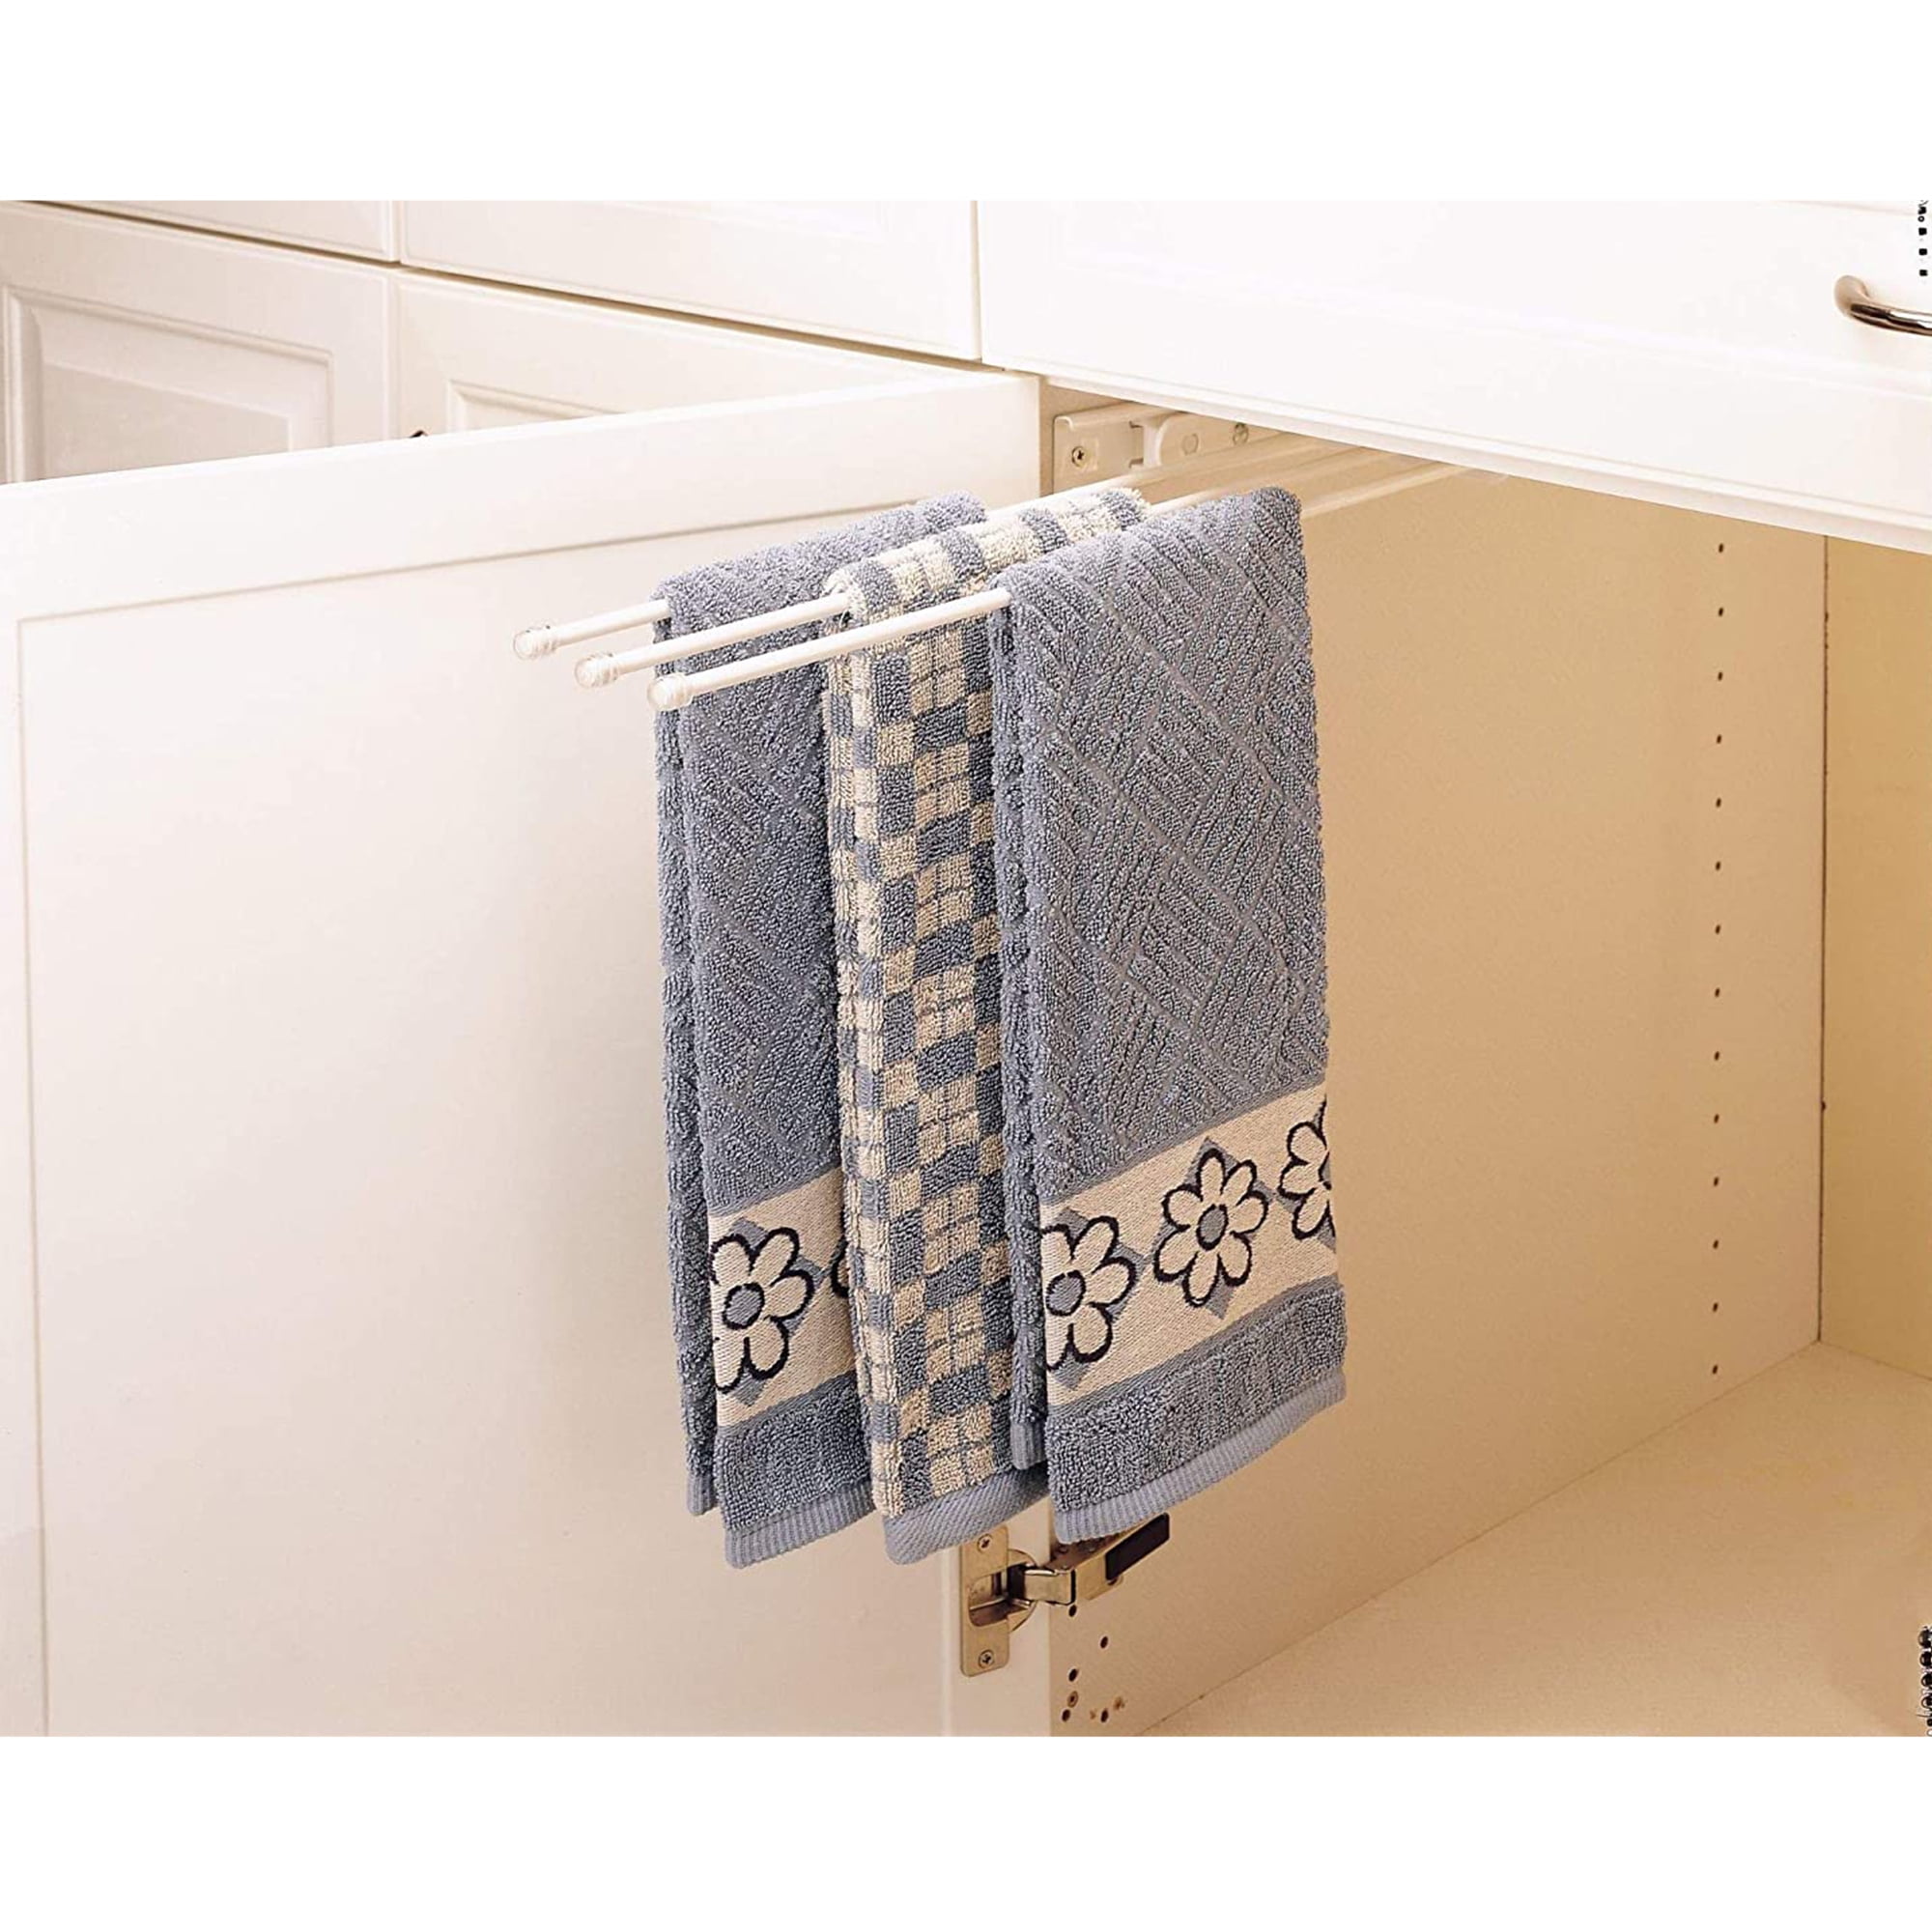  Real Solutions for Real Life Real Solutions Pull-Out Kitchen  Towel Holder Bar